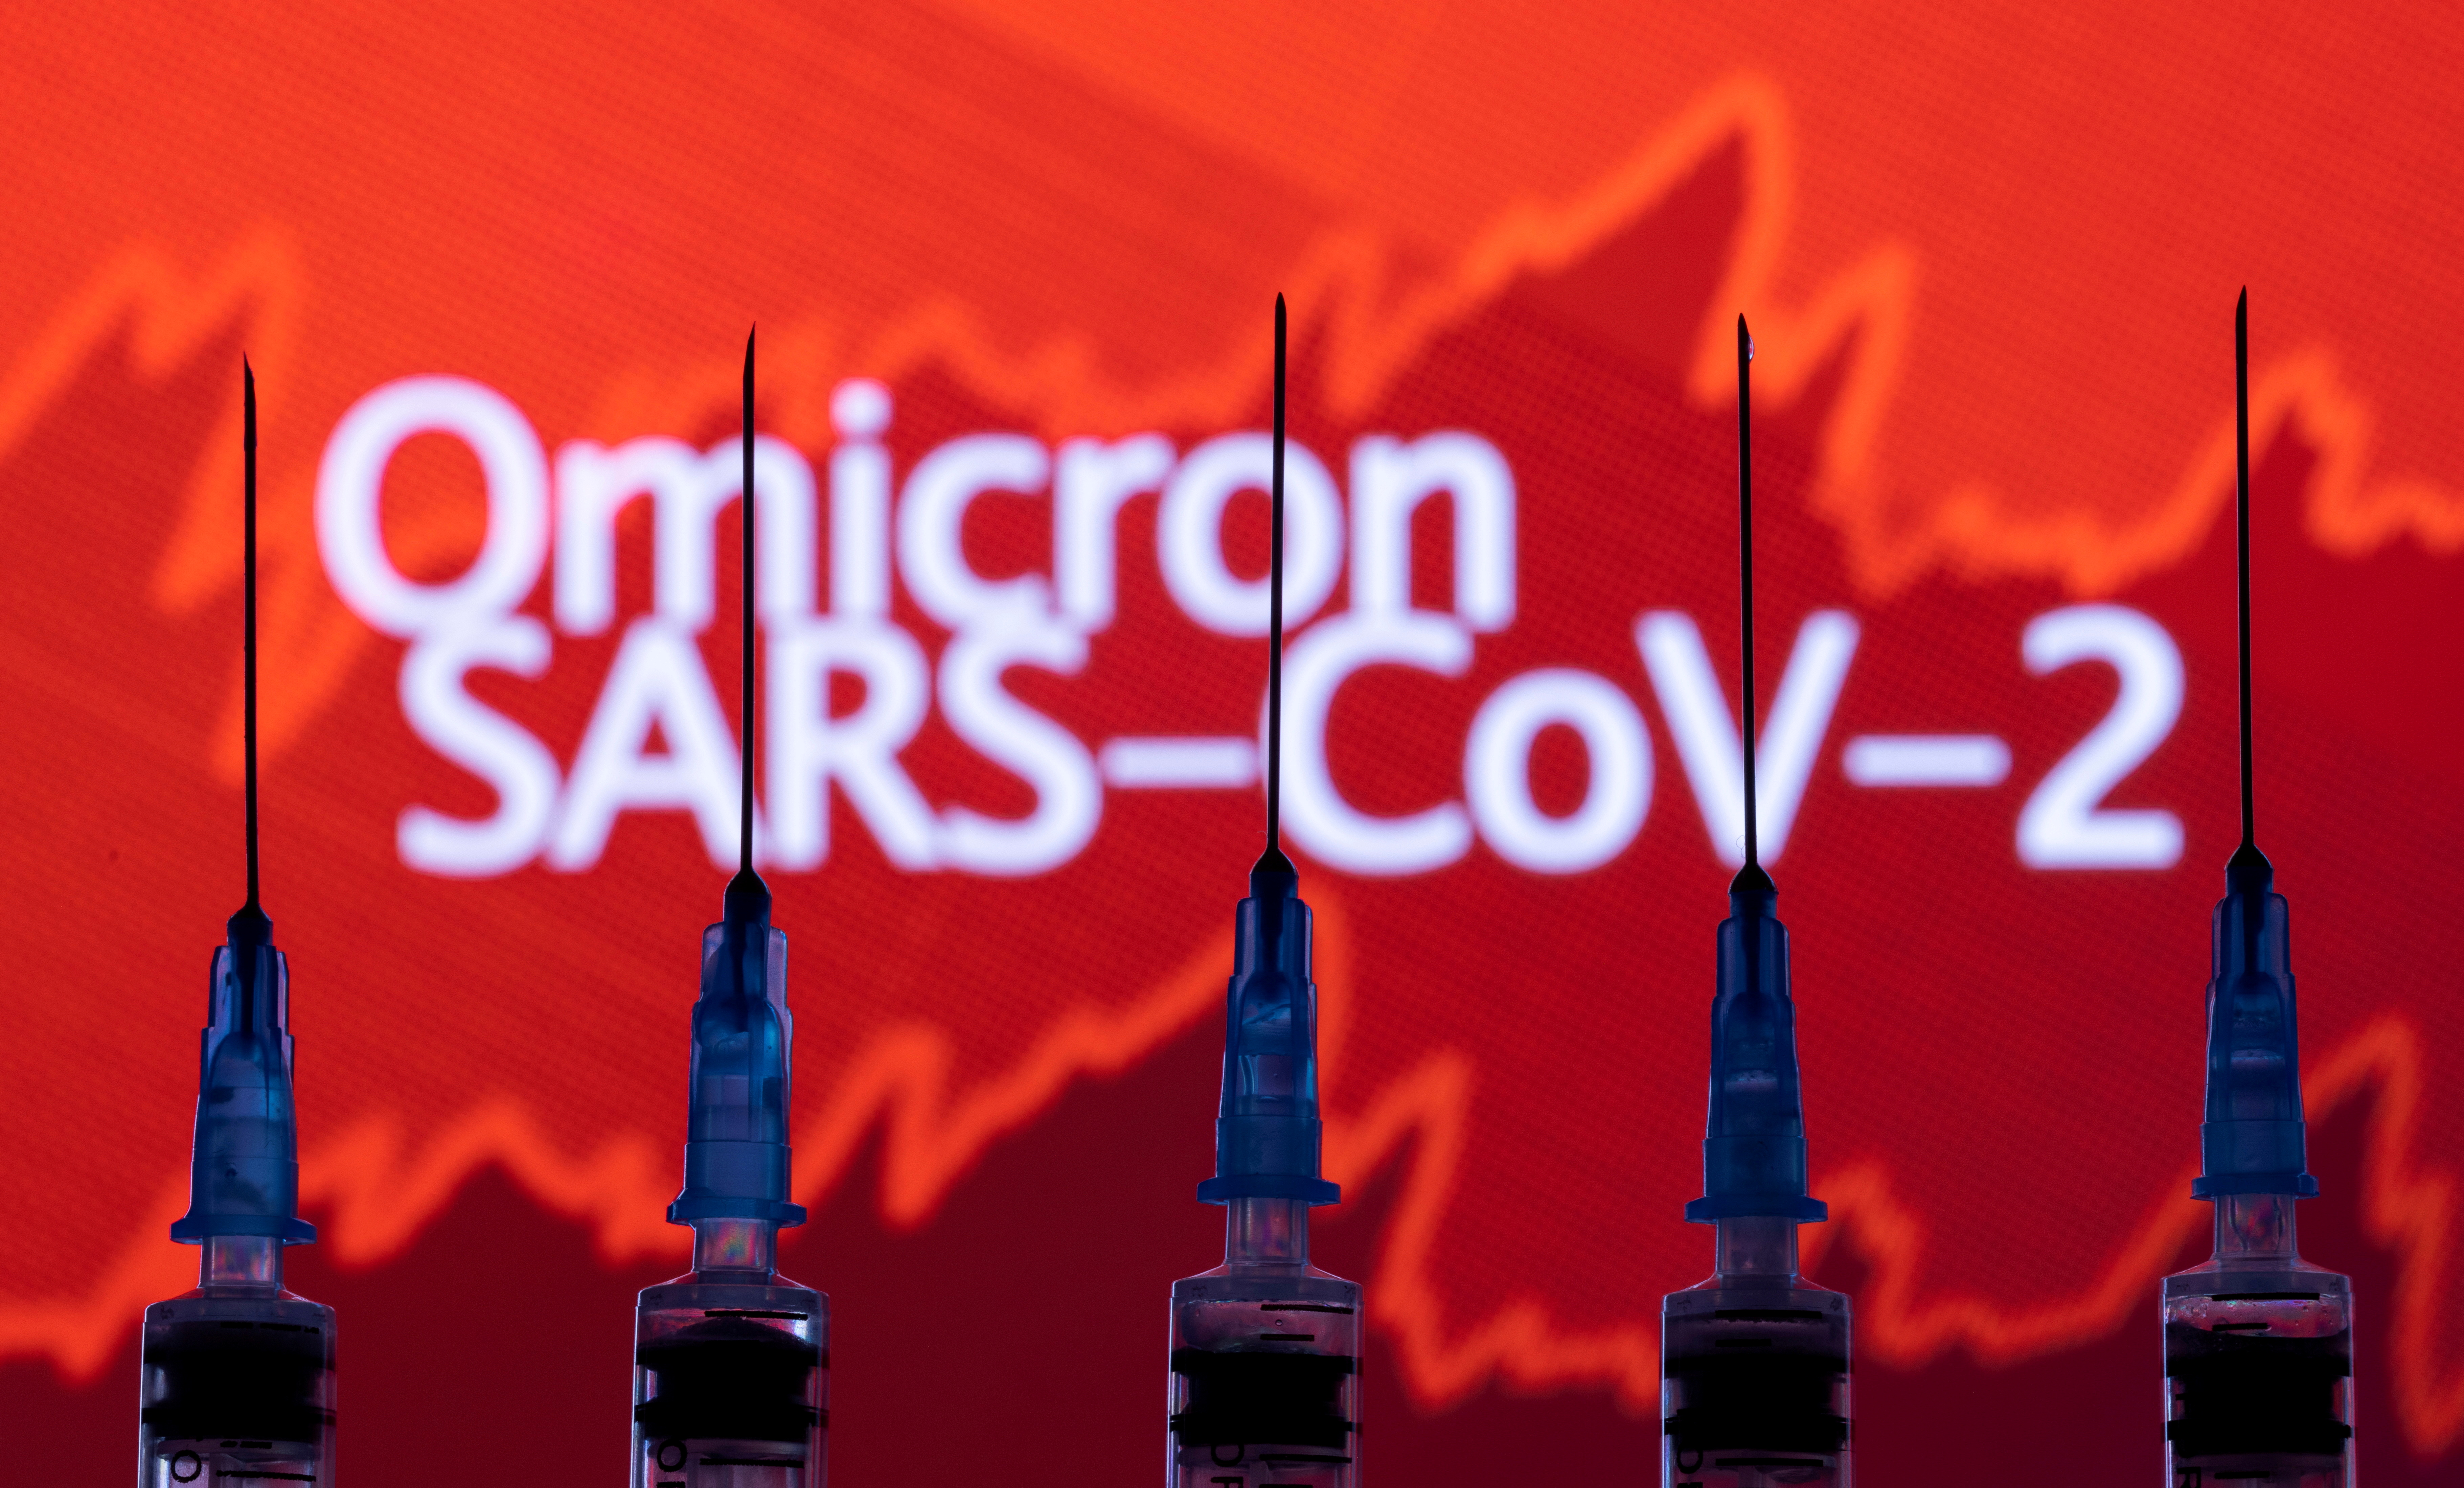 Syringes with needles are seen in front of a displayed stock graph and words "Omicron SARS-CoV-2" in this illustration taken, November 27, 2021. REUTERS/Dado Ruvic/Illustration